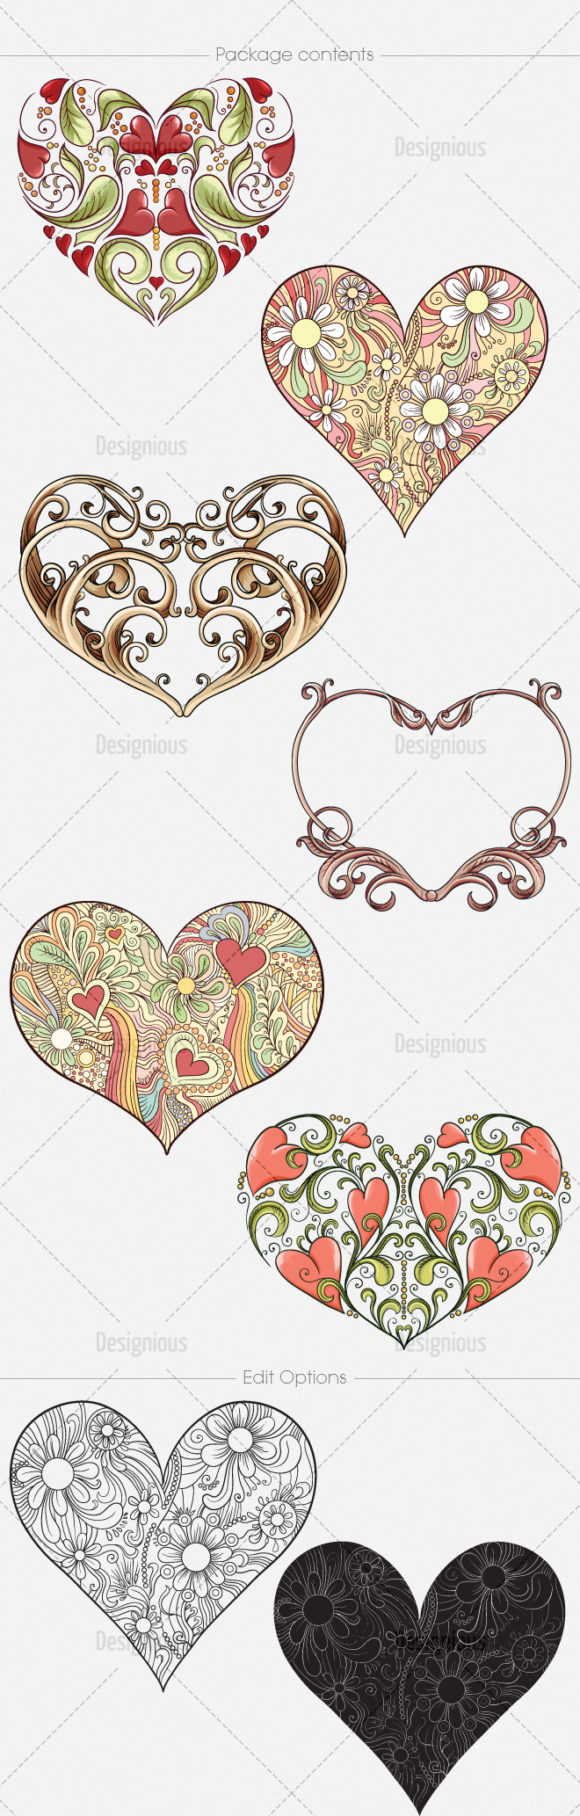 Hearts Vector Pack 5 2